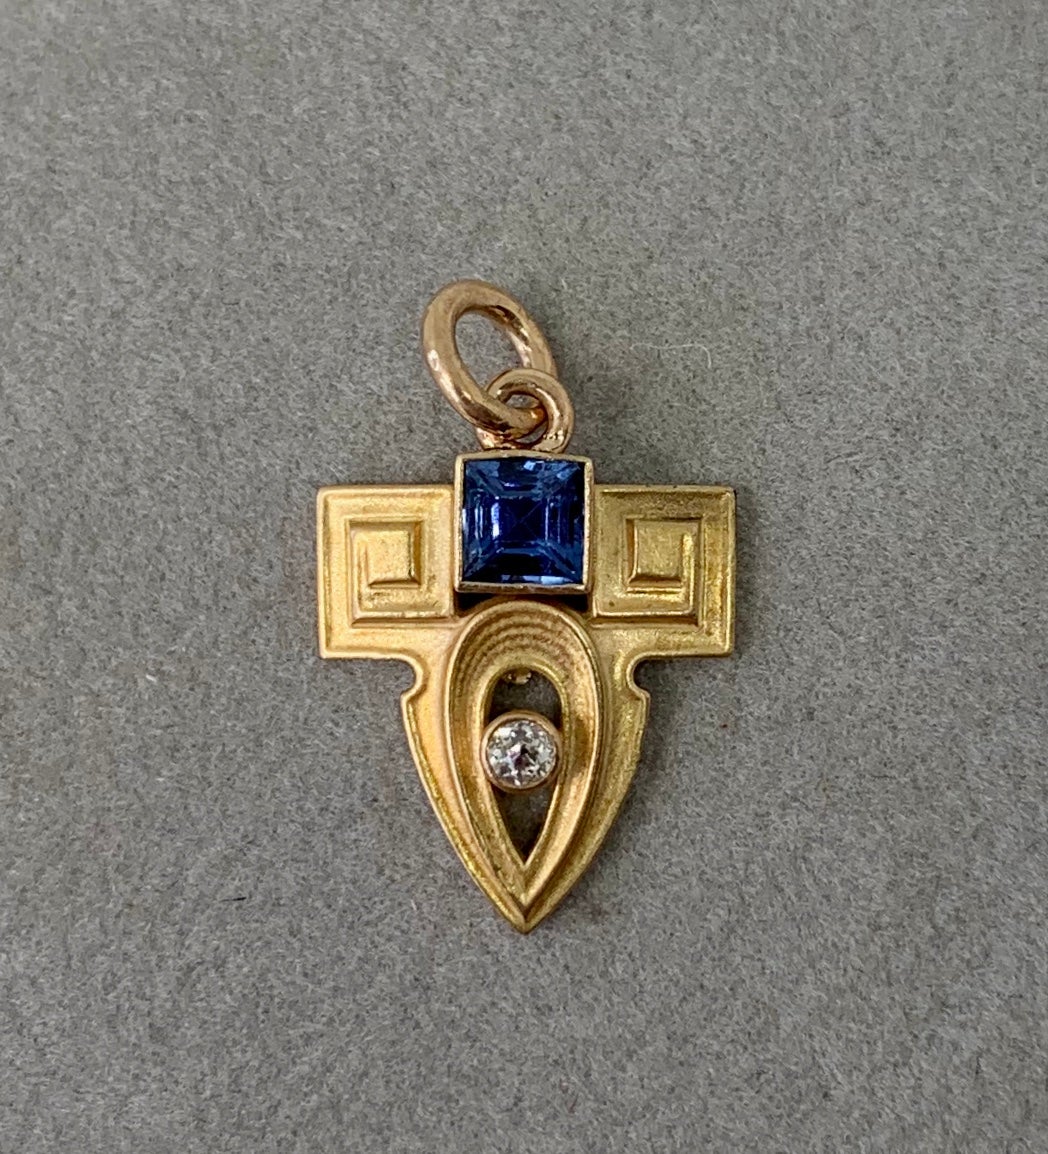 This is a stunning antique Art Deco - Victorian - Edwardian Sapphire Diamond Lavaliere Pendant in 14 Karat Gold by the esteemed American jewelry maker Whiteside and Blank.  The beautiful pendant has a central square cut fine blue sapphire of